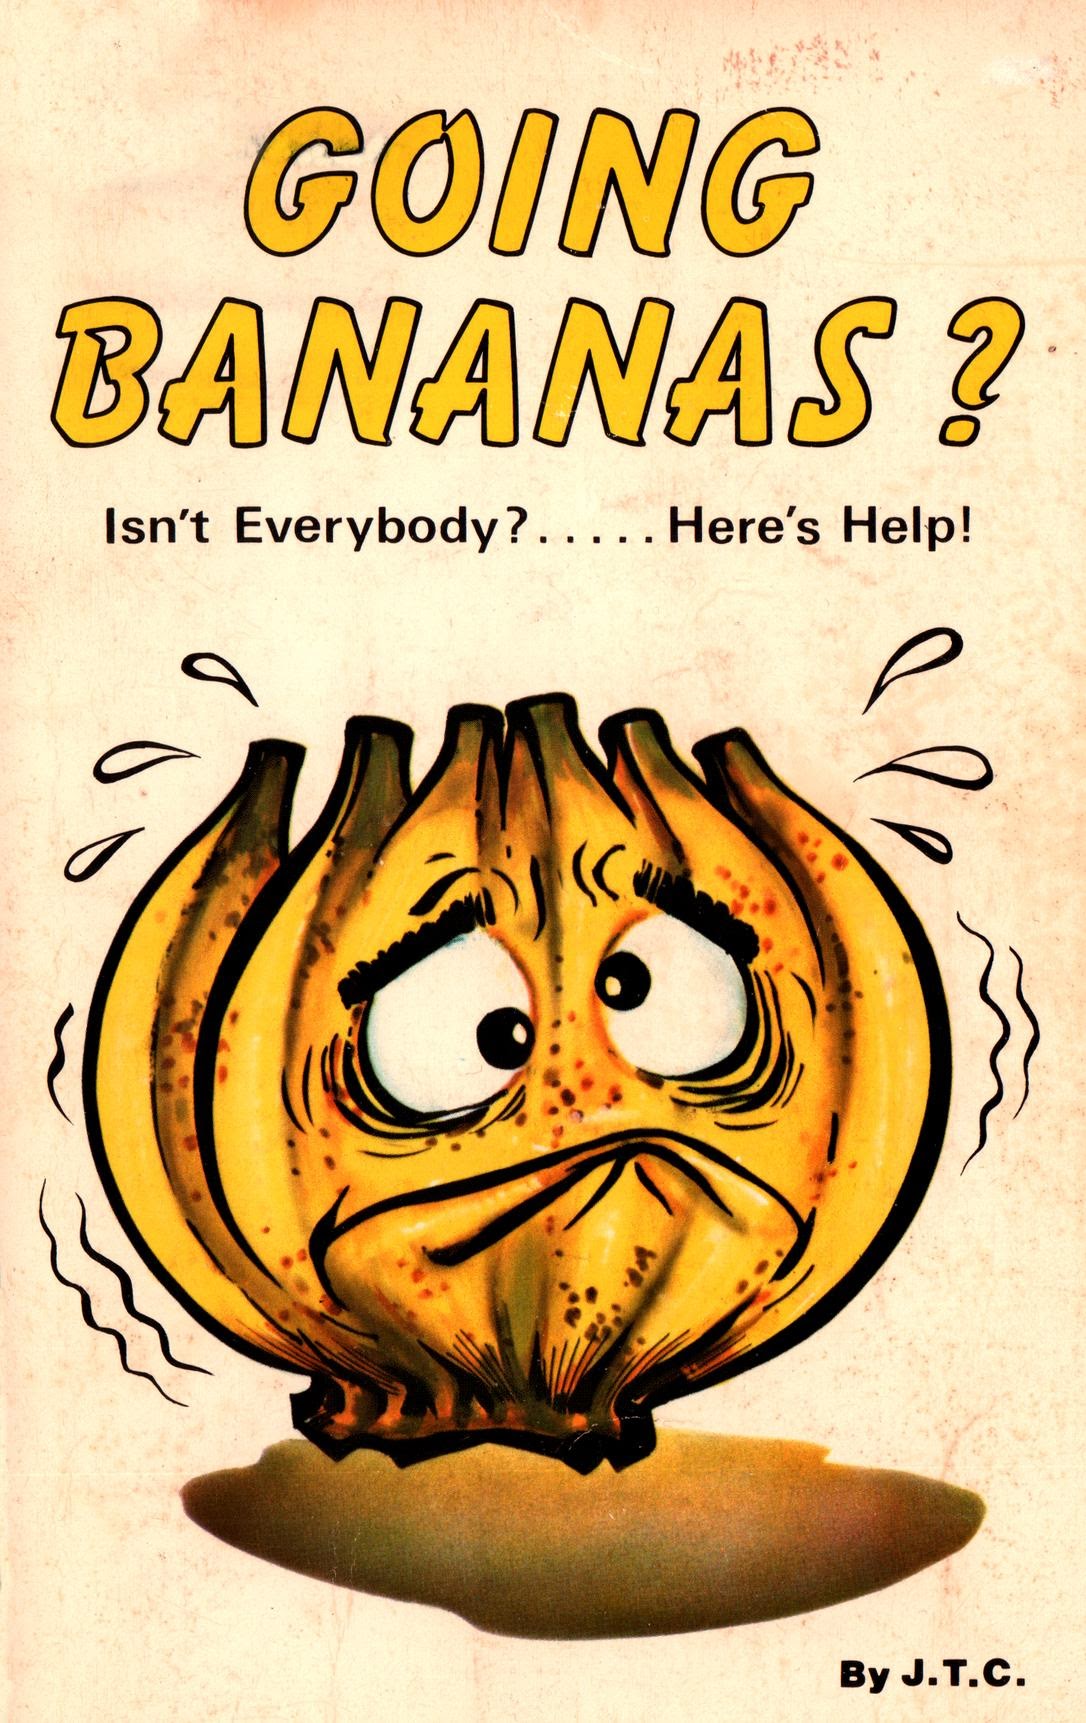 Read online Going bananas? comic -  Issue # TPB (Part 1) - 1